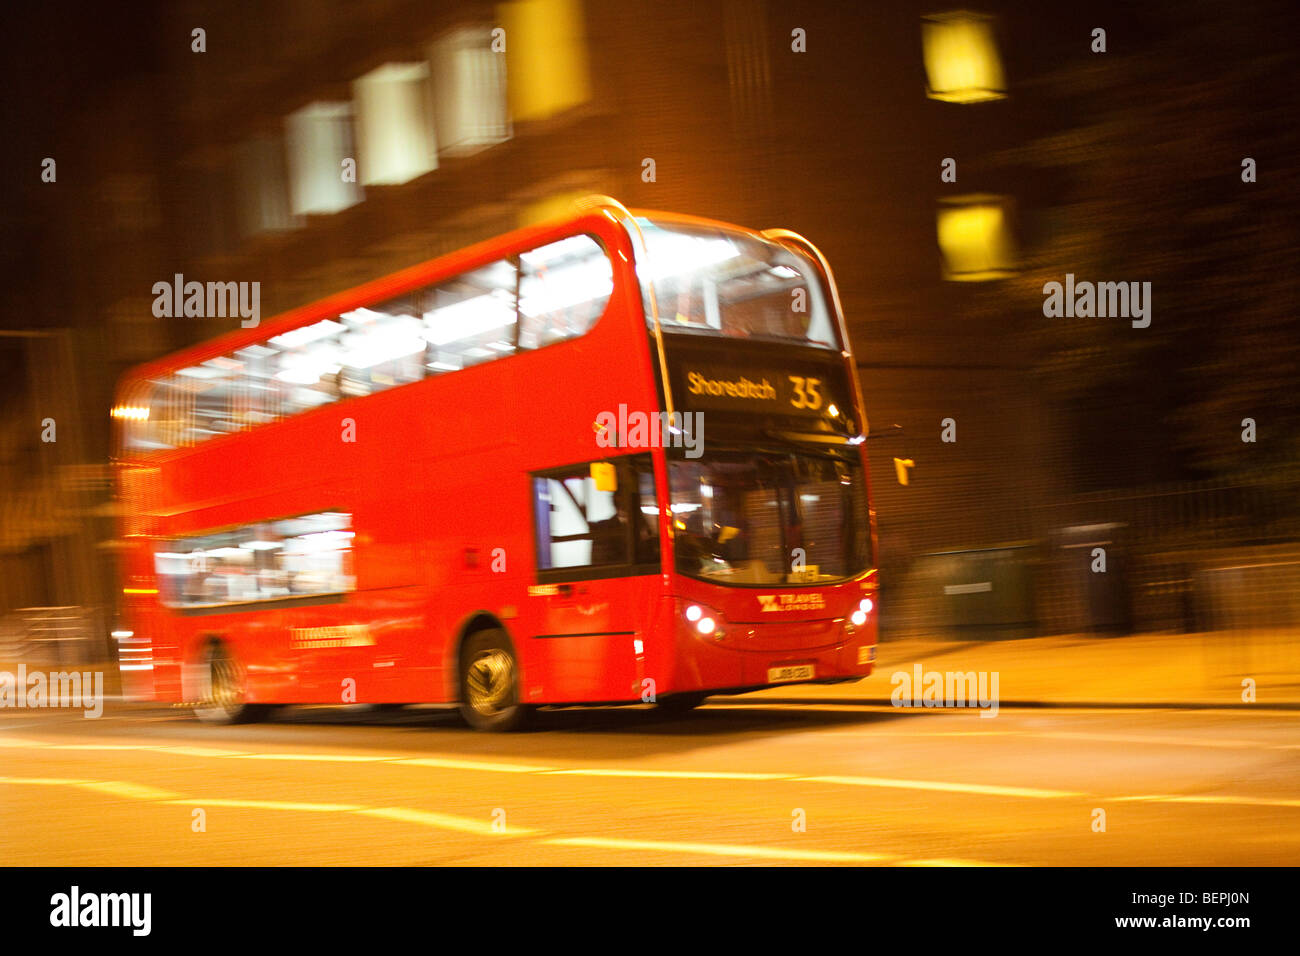 Panning shot of a double decker bus, London, England, United Kingdom Stock Photo